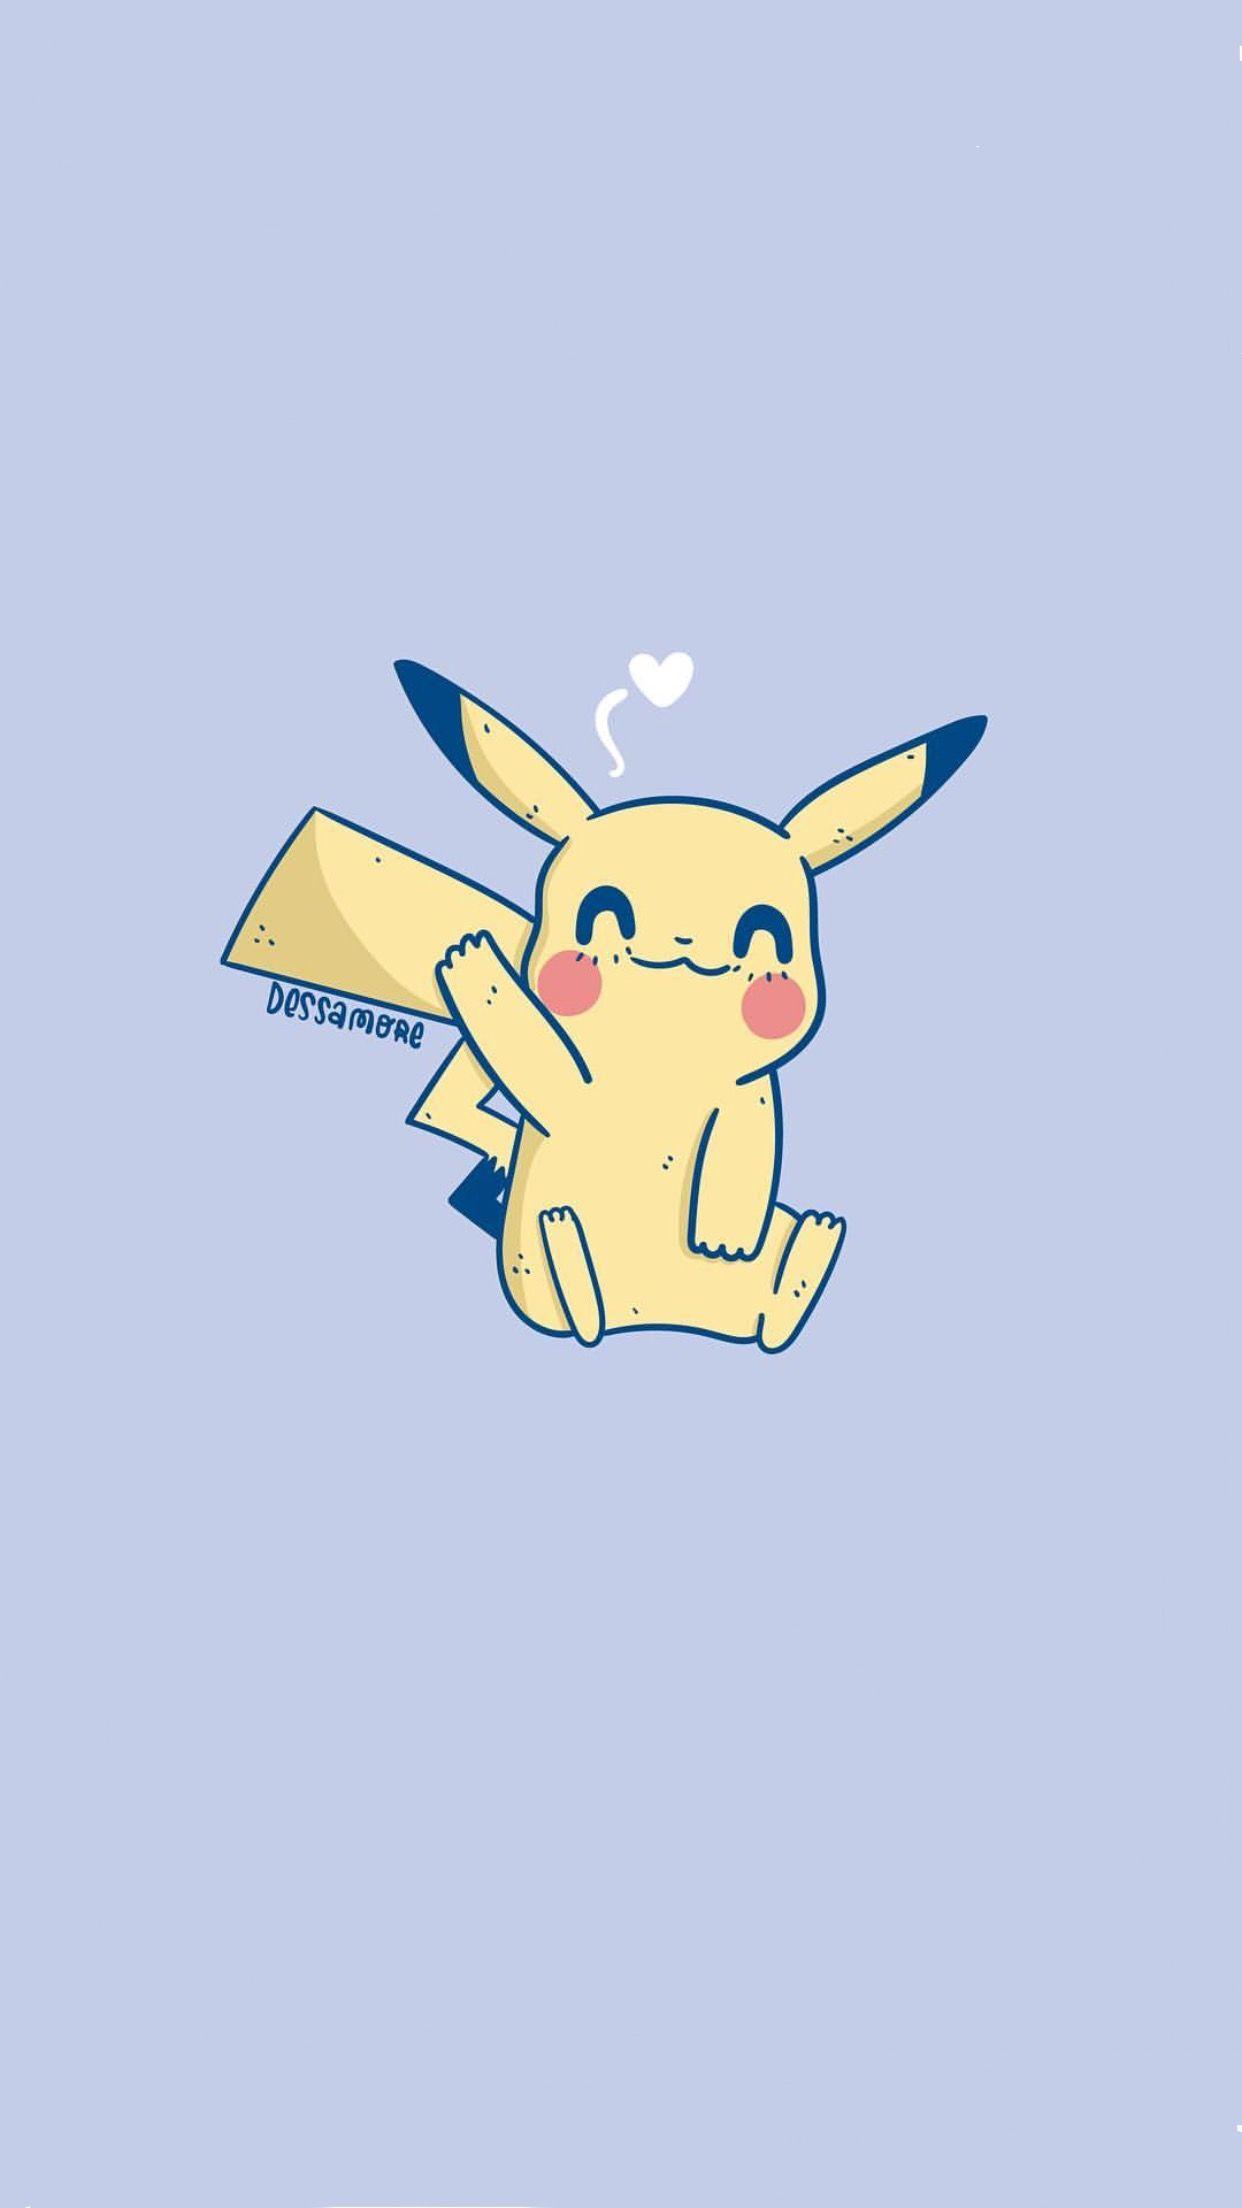 A cute pikachu sitting on the ground with its arms crossed - Pokemon, Pikachu